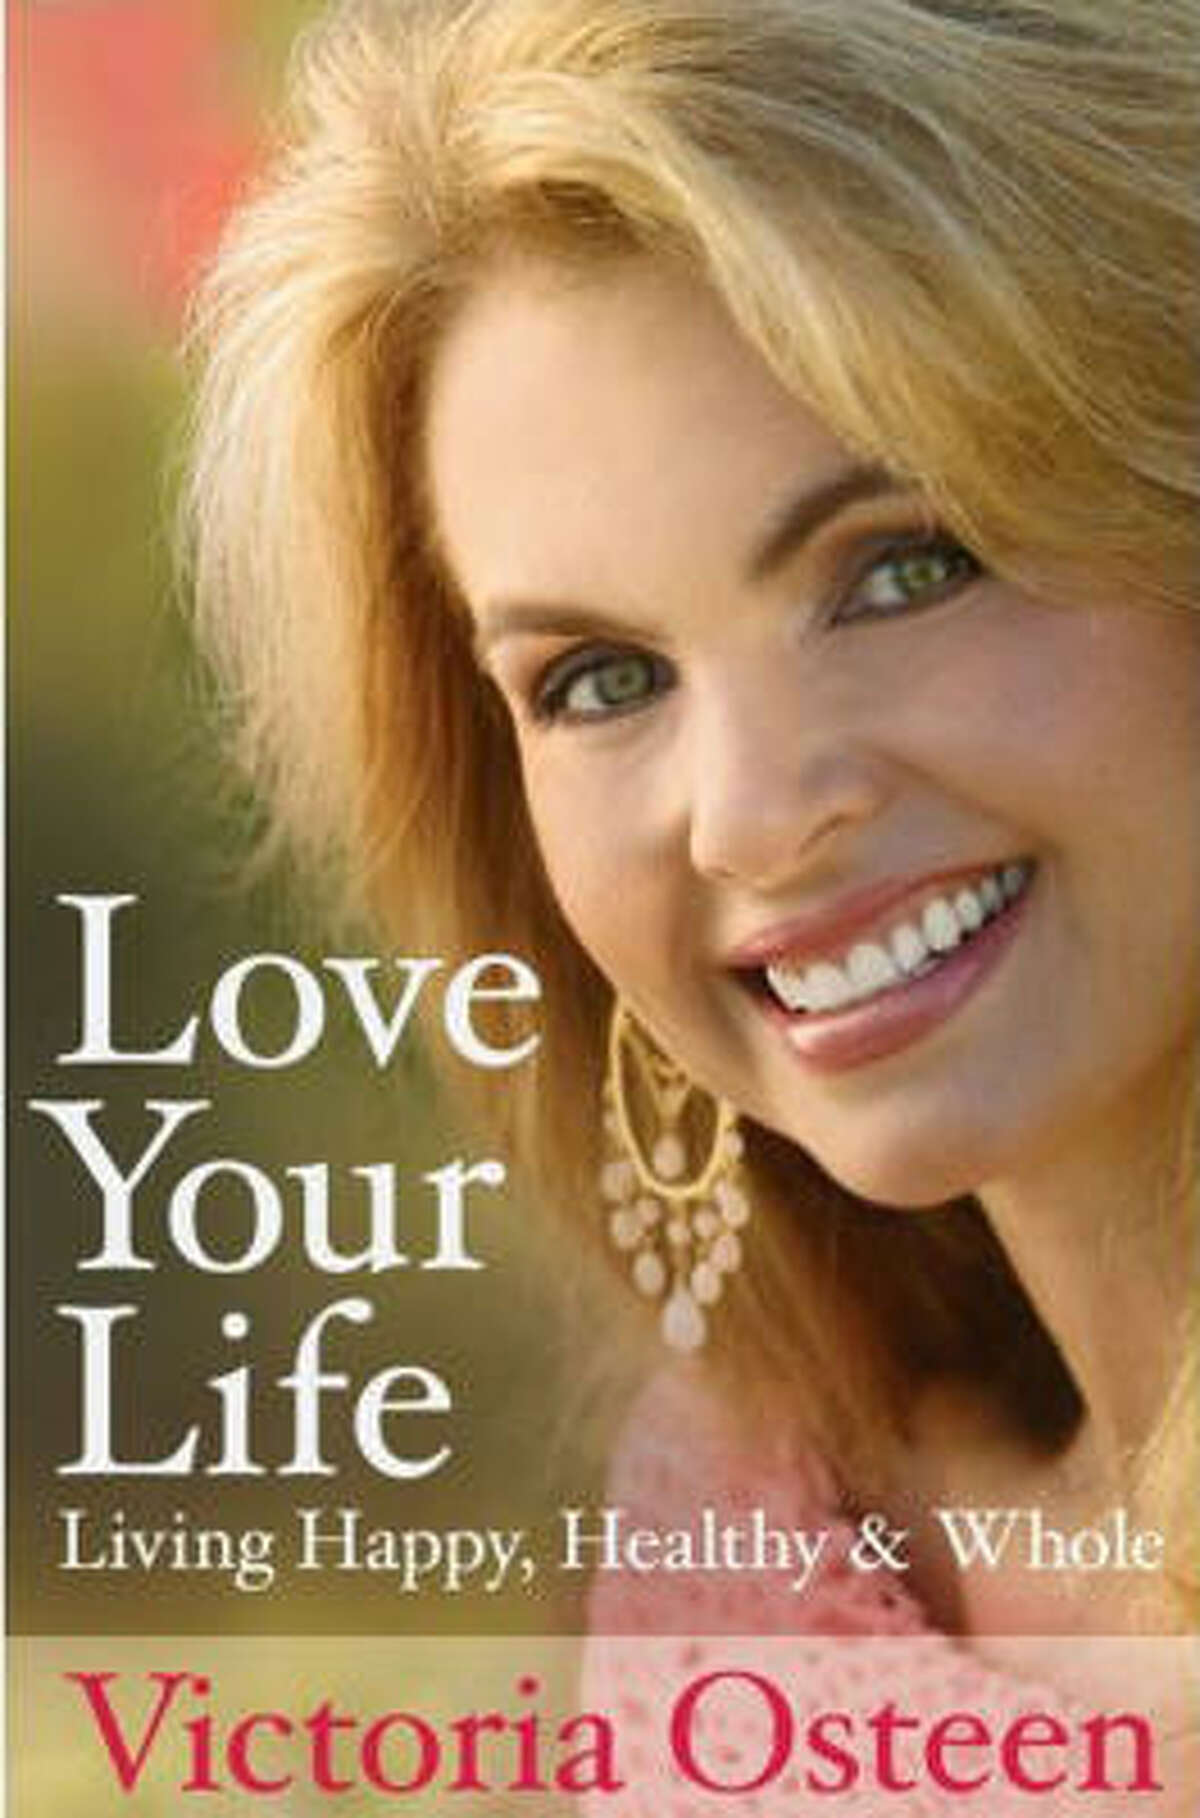 Love Your Life: Living Happy, Healthy and Whole (Free Press, $25) was published in October of 2008. Simon & Schuster ordered an initial printing of 780,000 copies. Victoria also recently released a series of children's books.